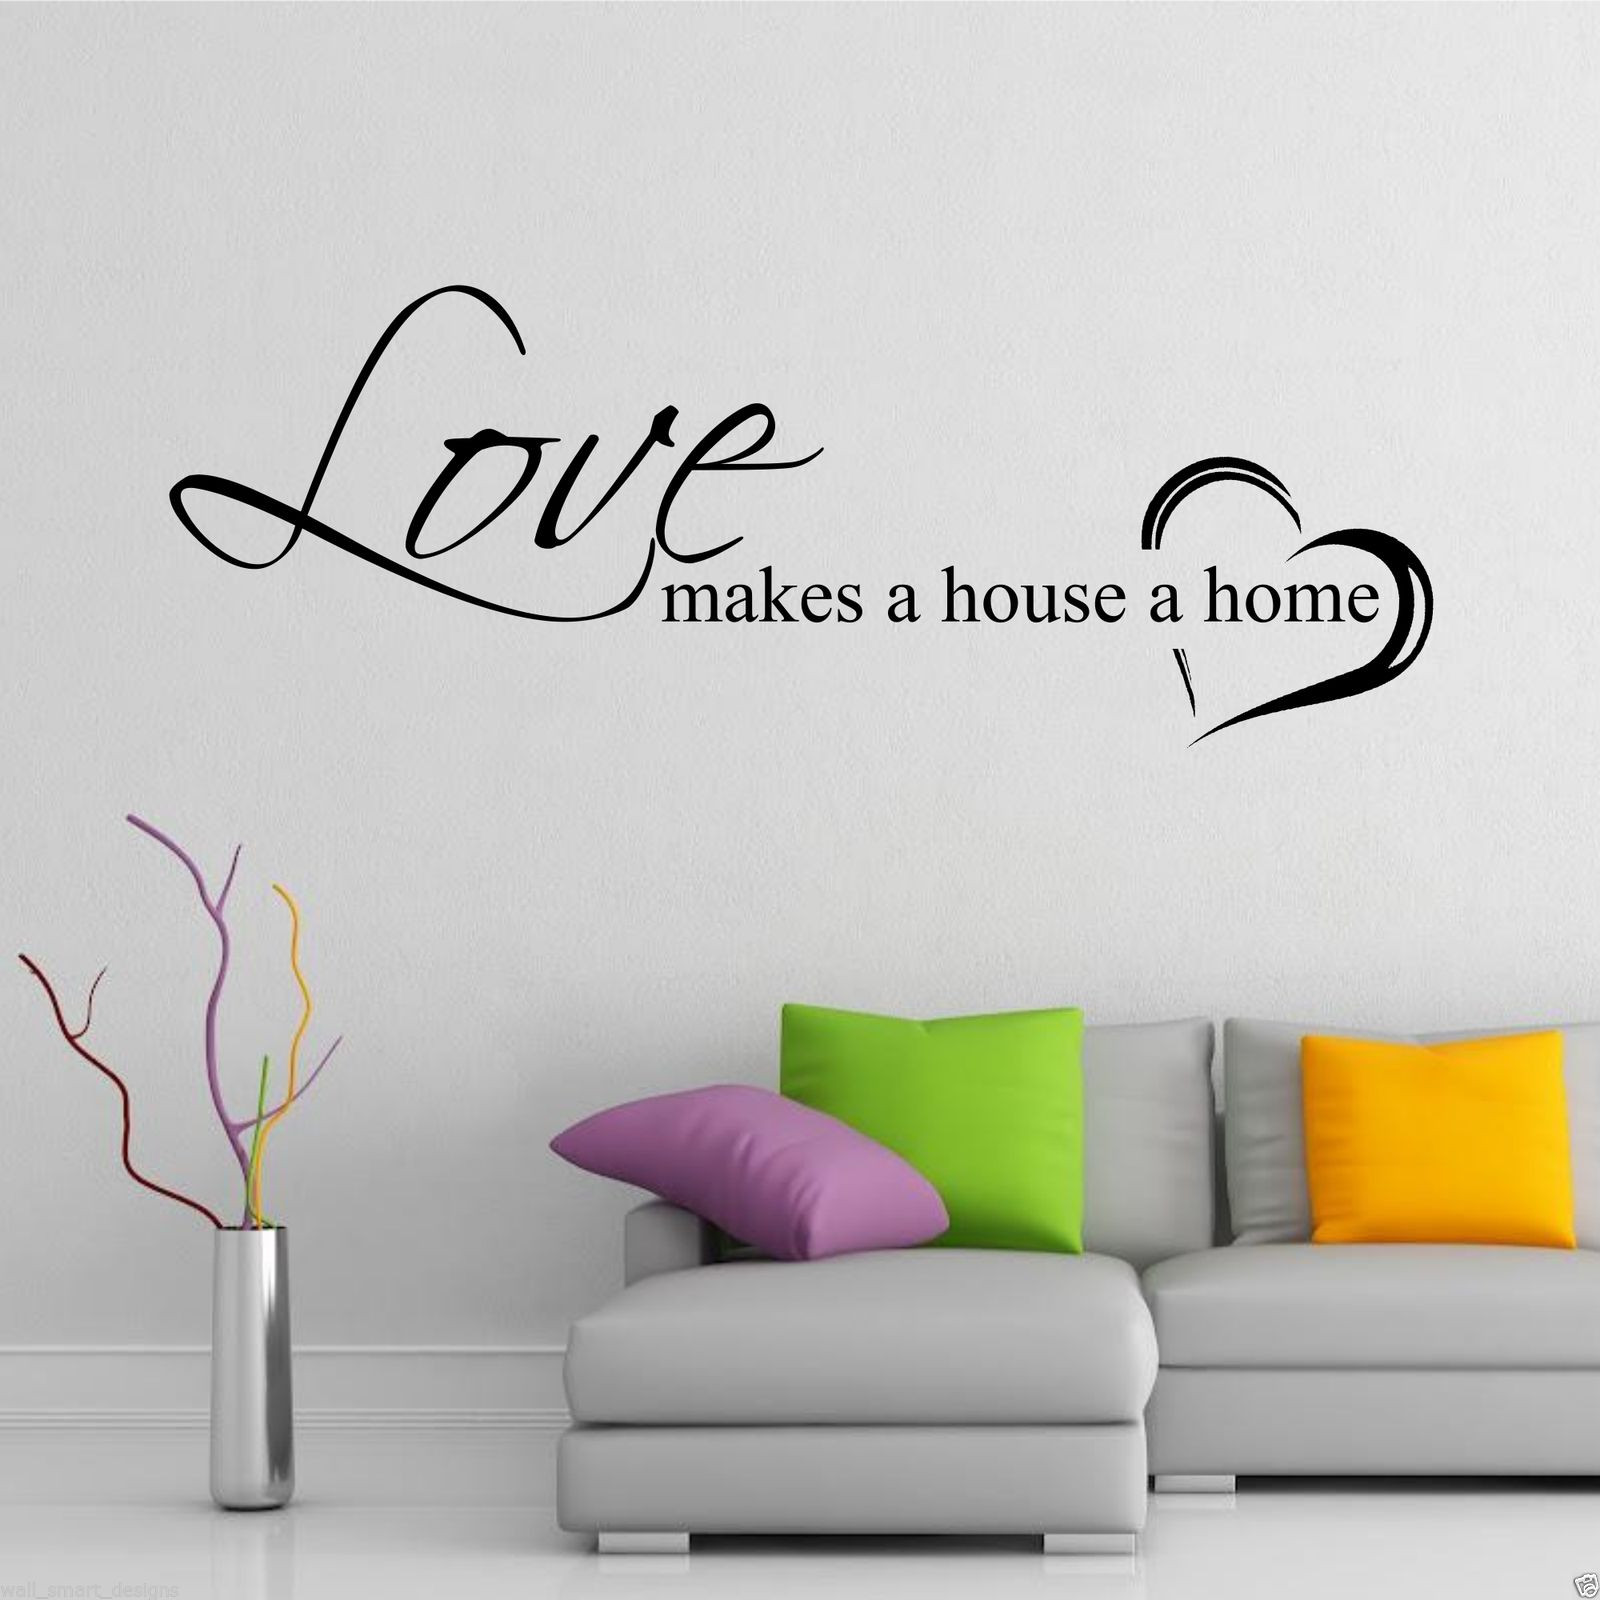 Family Quotes Wall Art
 Home Love Family Wall Art Sticker Quote Decal Mural